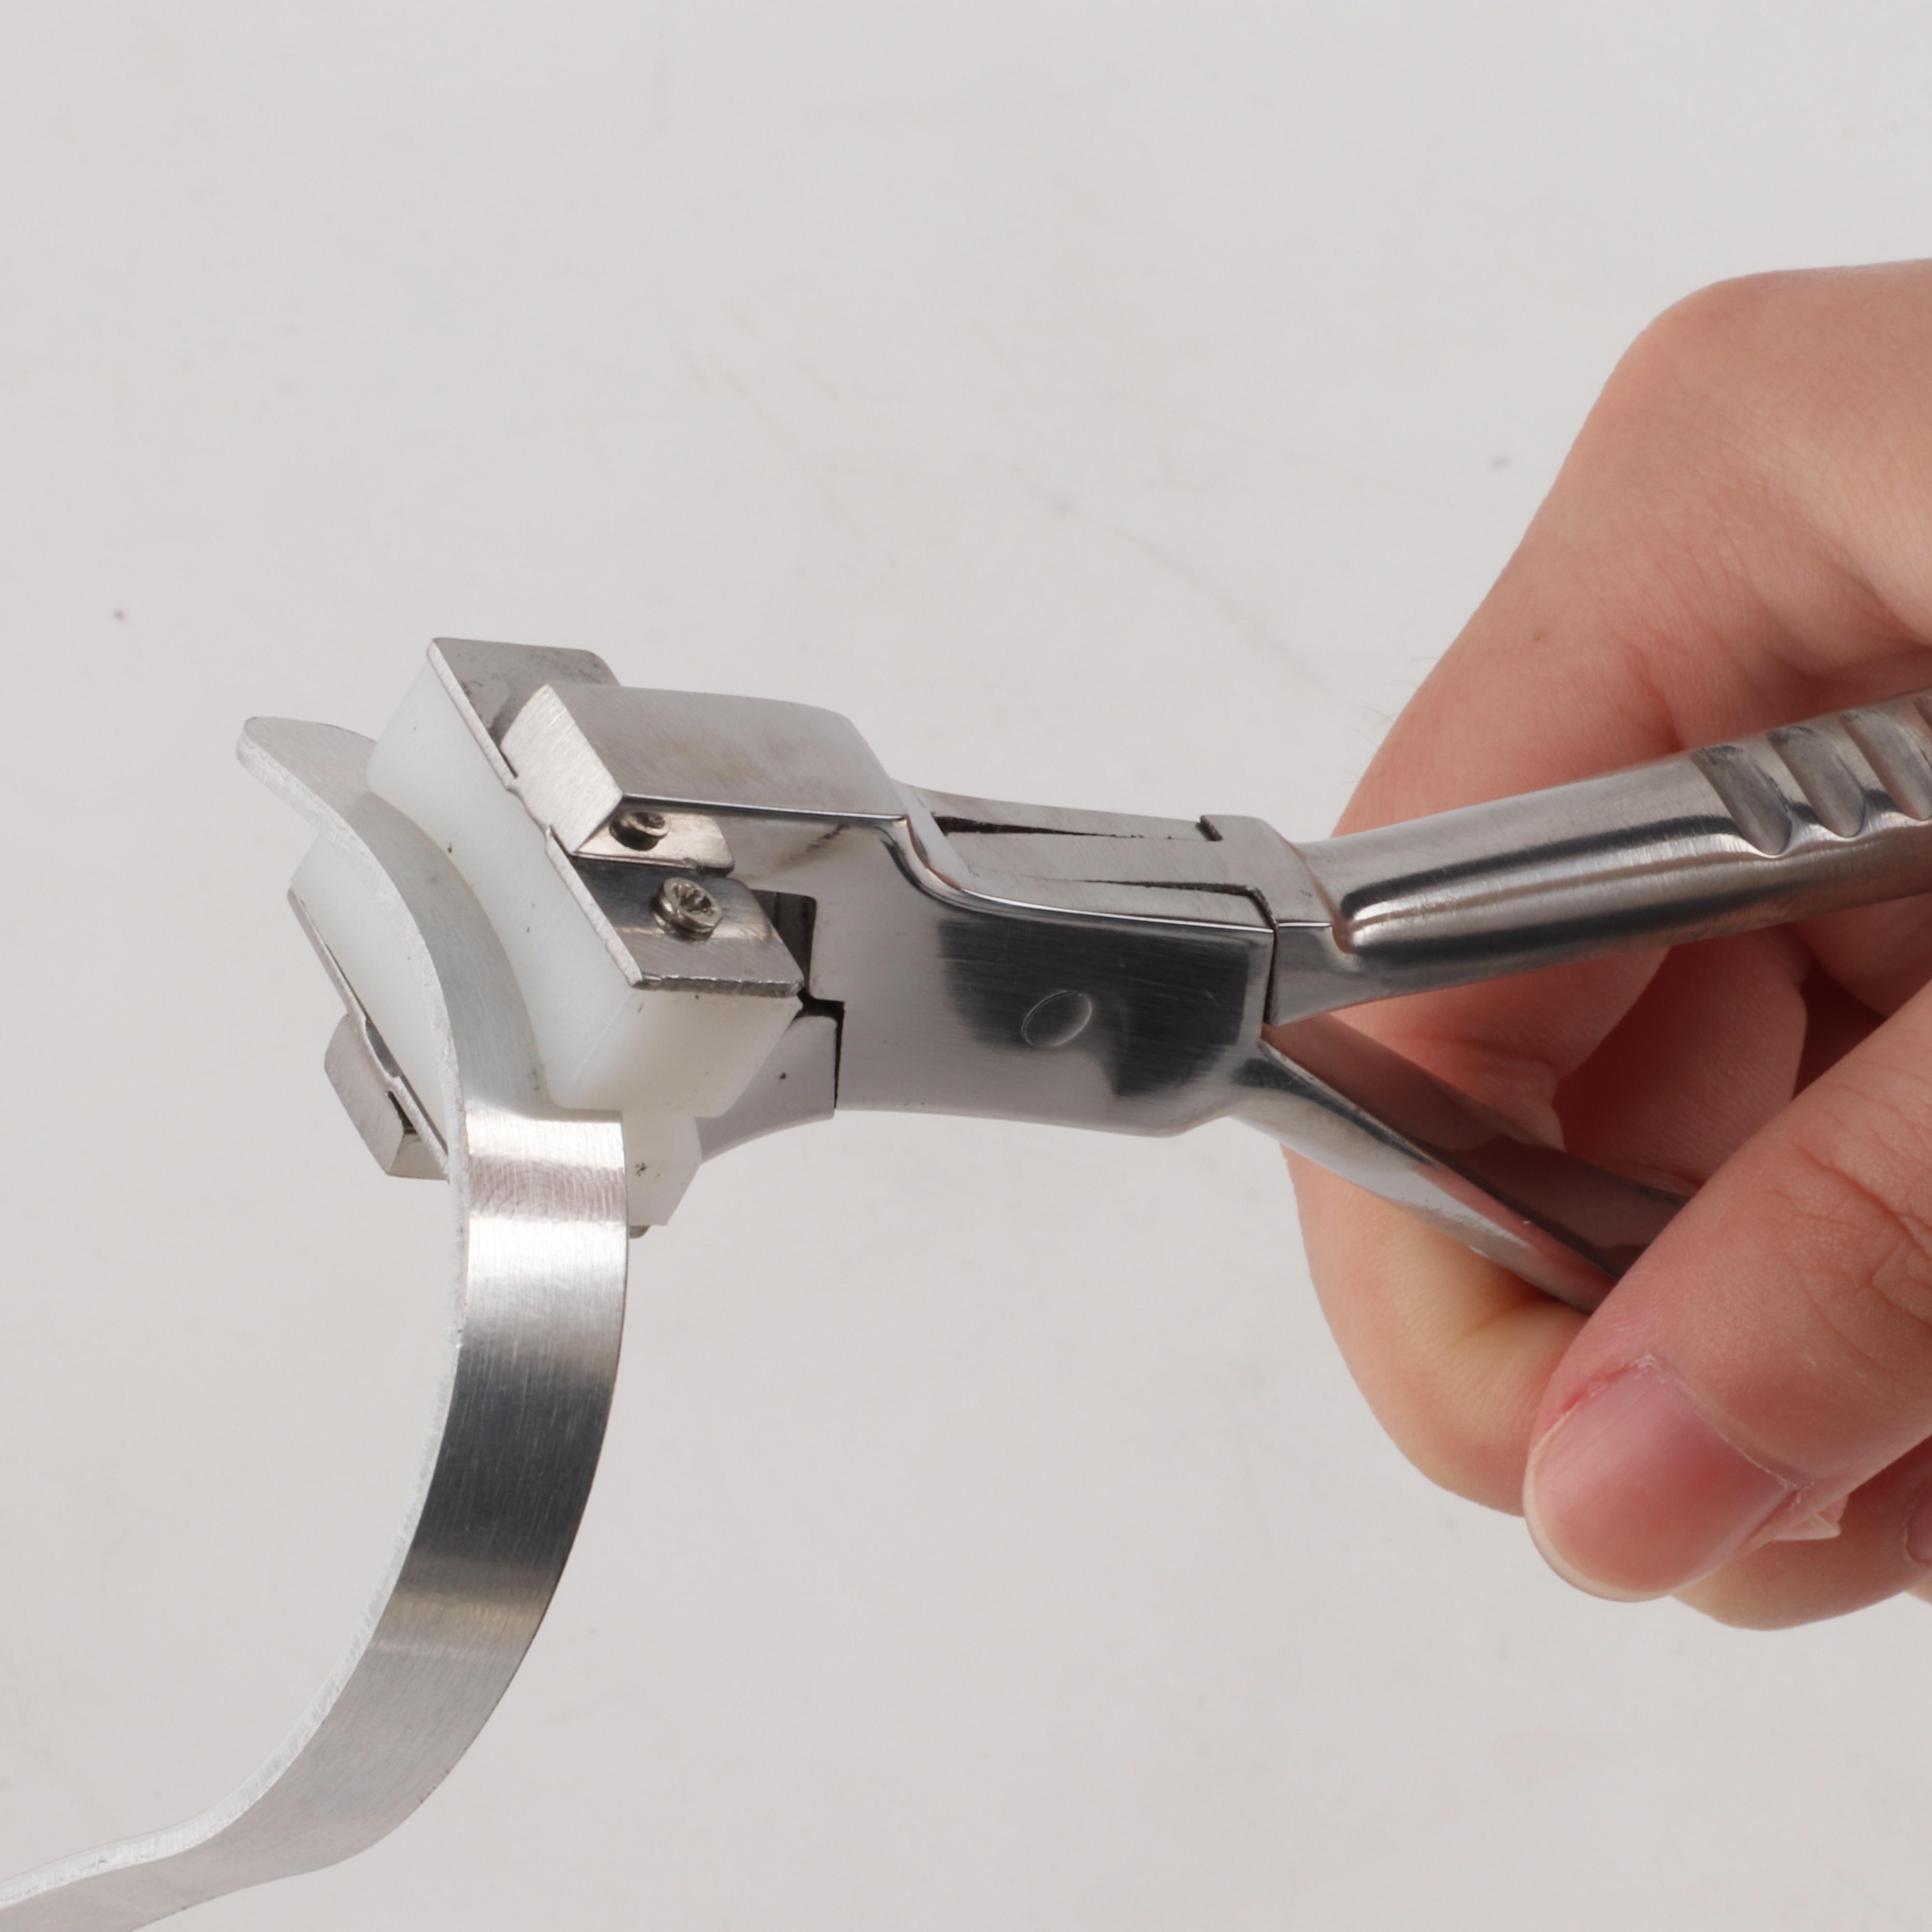  Bracelet Bender, Portable Easy to Operate Stainless